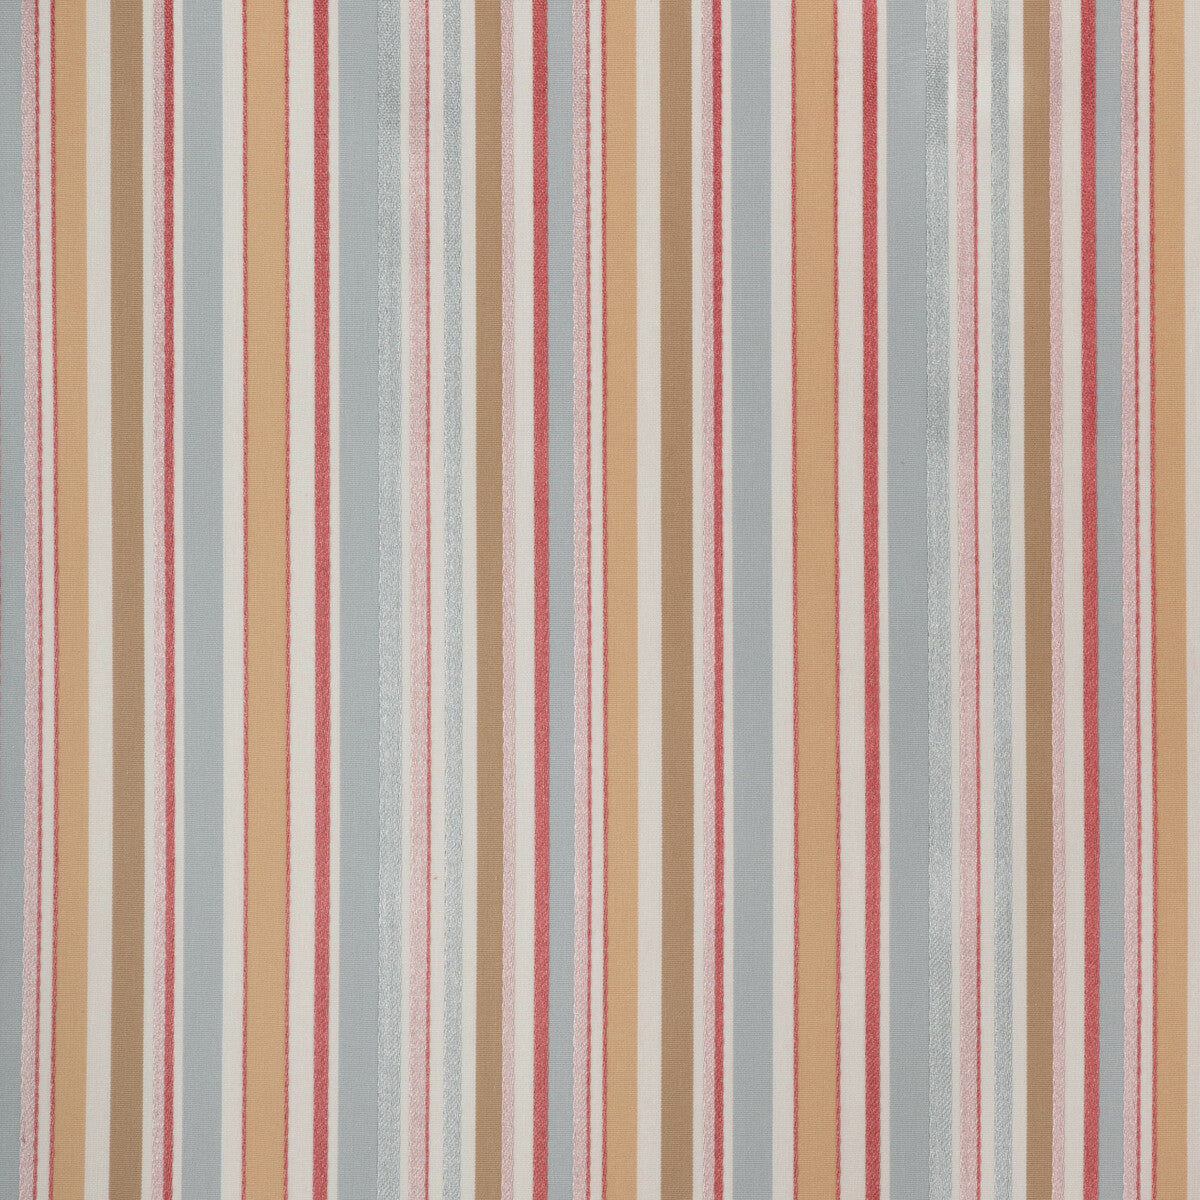 Siders Stripe fabric in rose/blue color - pattern 2023103.517.0 - by Lee Jofa in the Highfield Stripes And Plaids collection